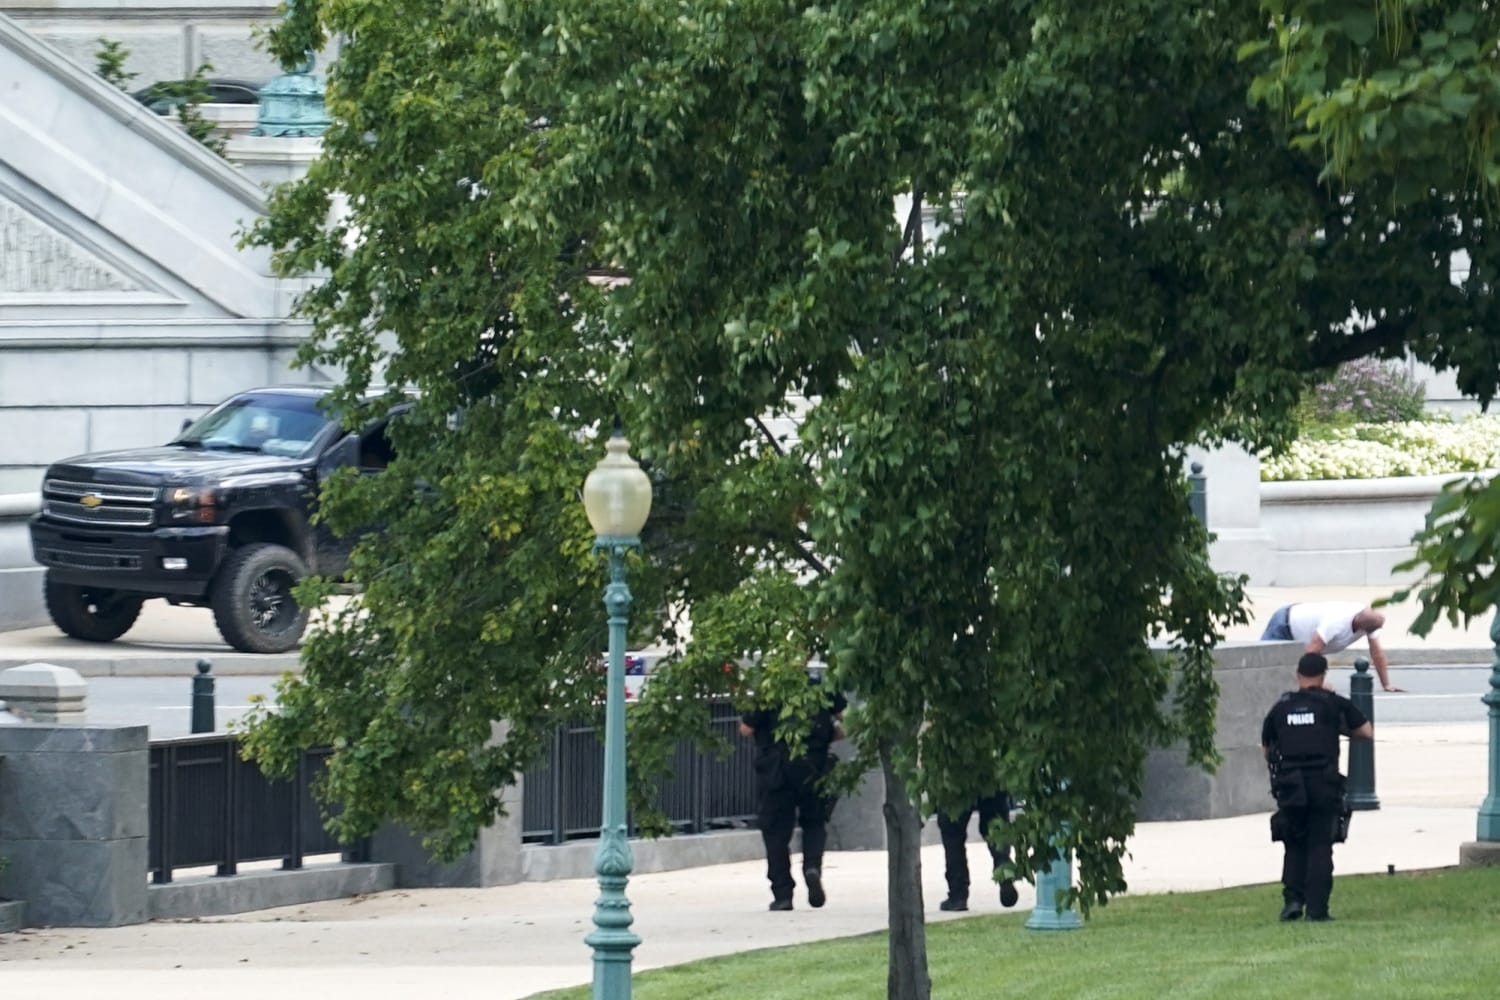 Man who claimed he had bomb near Capitol pleads guilty